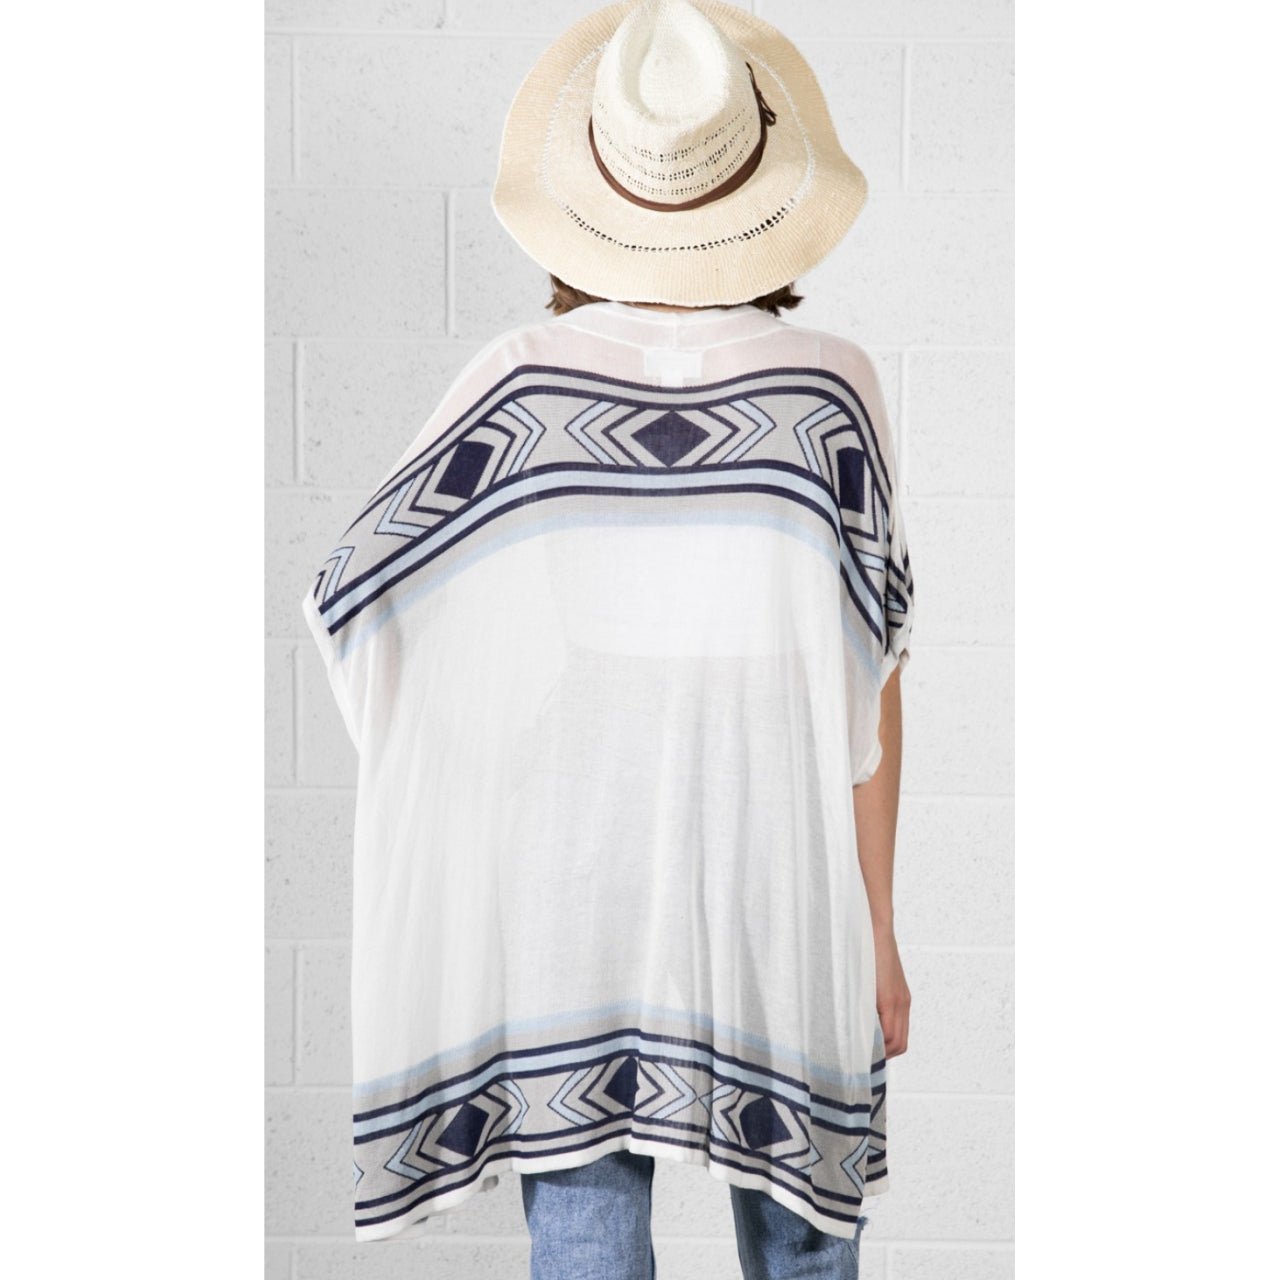 Aisley White and Blue Patterned Spring Kimono - The Graphic Tee